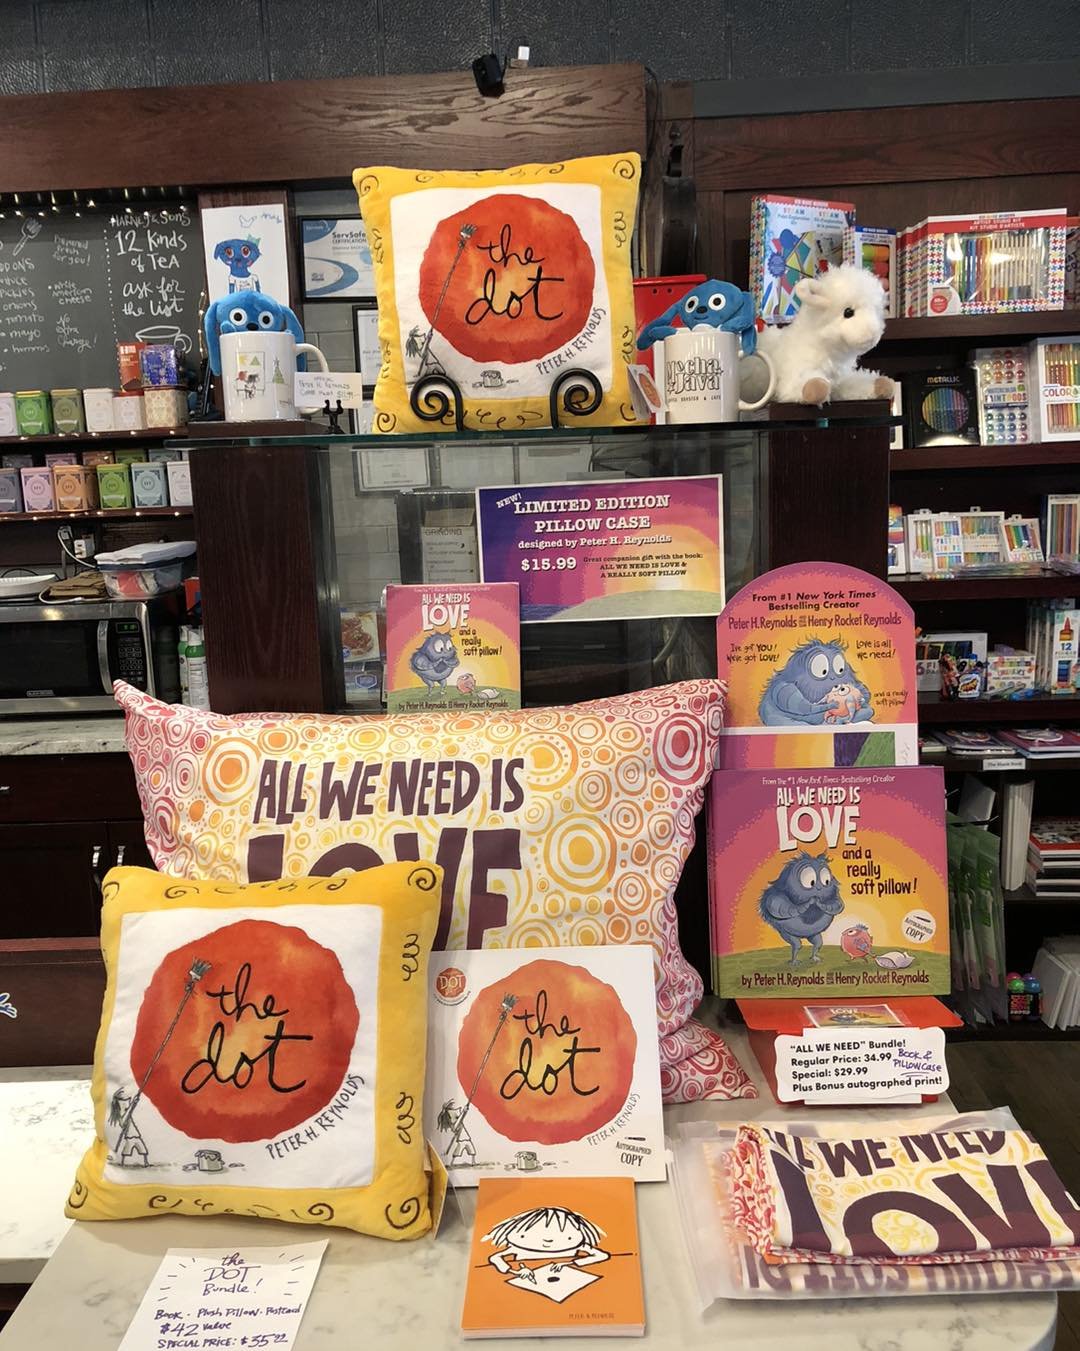 Special Peter H. Reynolds book bundles featuring either The Dot or All We Need Is Love&rdquo;. Great teacher appreciation gifts or end of year classroom gifts!